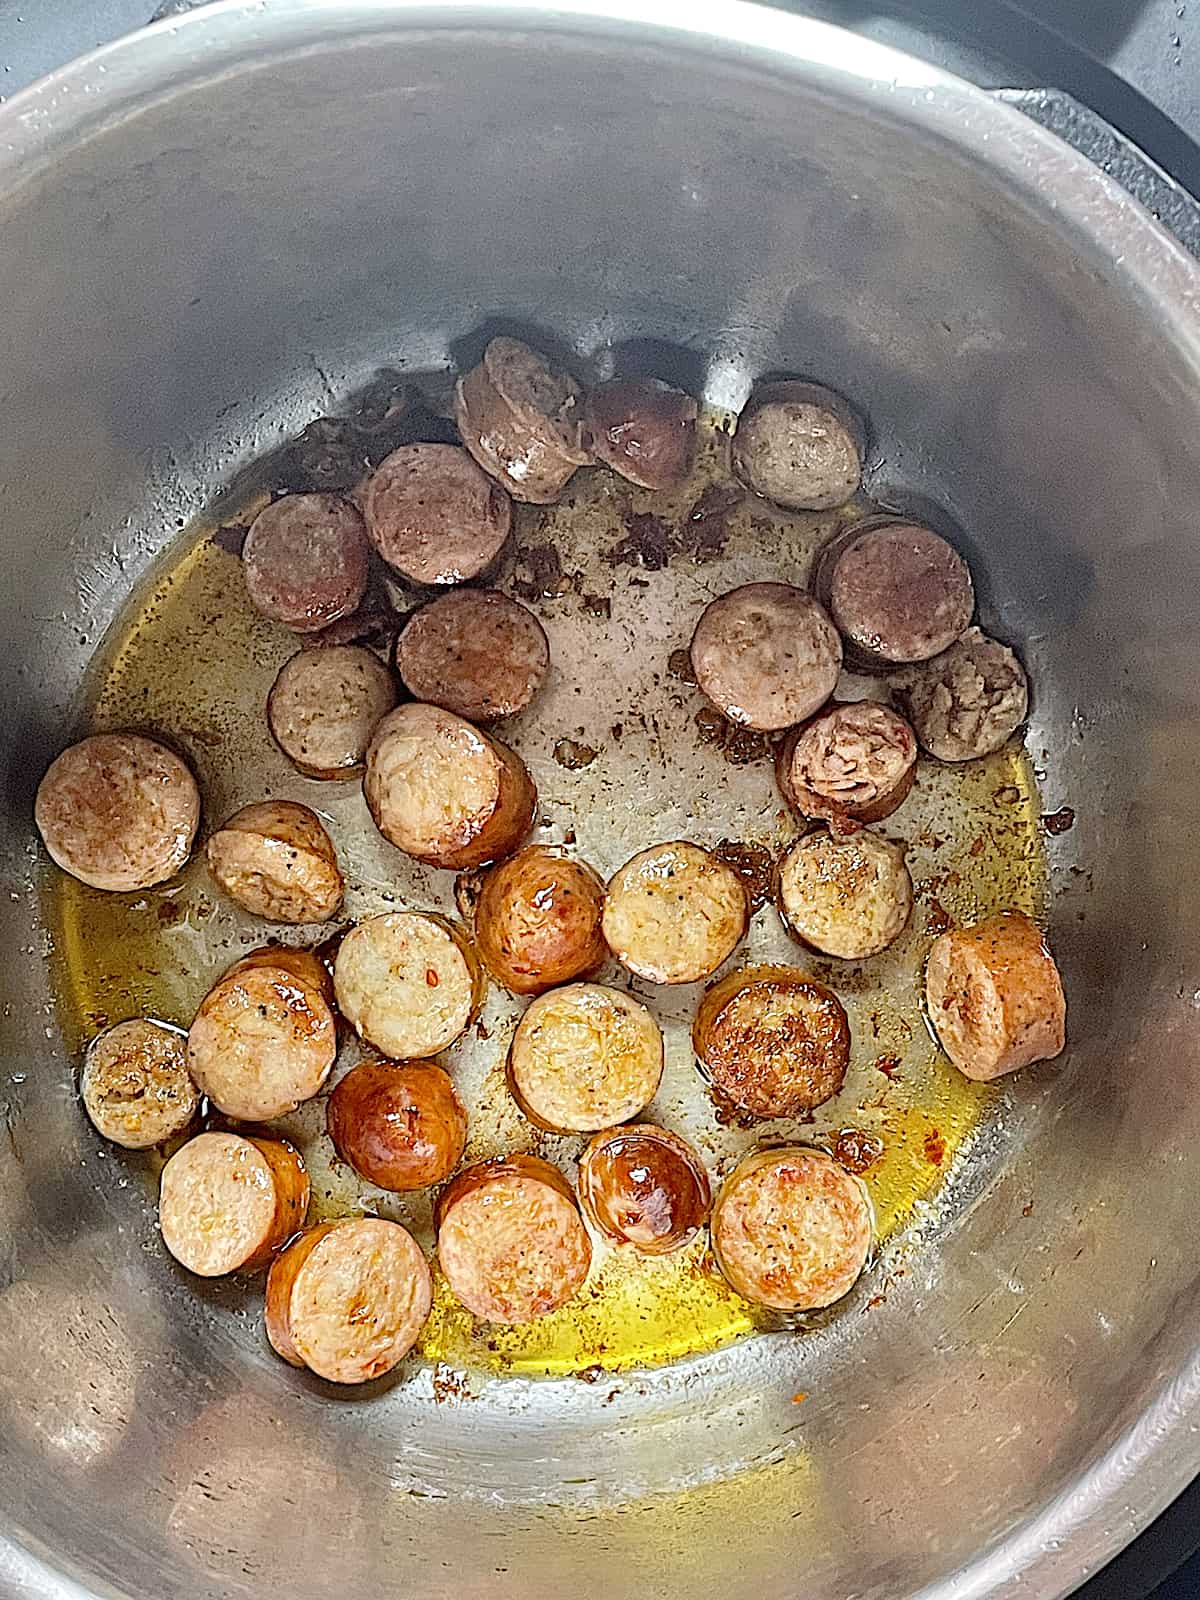 andouille sausage cooked in a pressure cooker